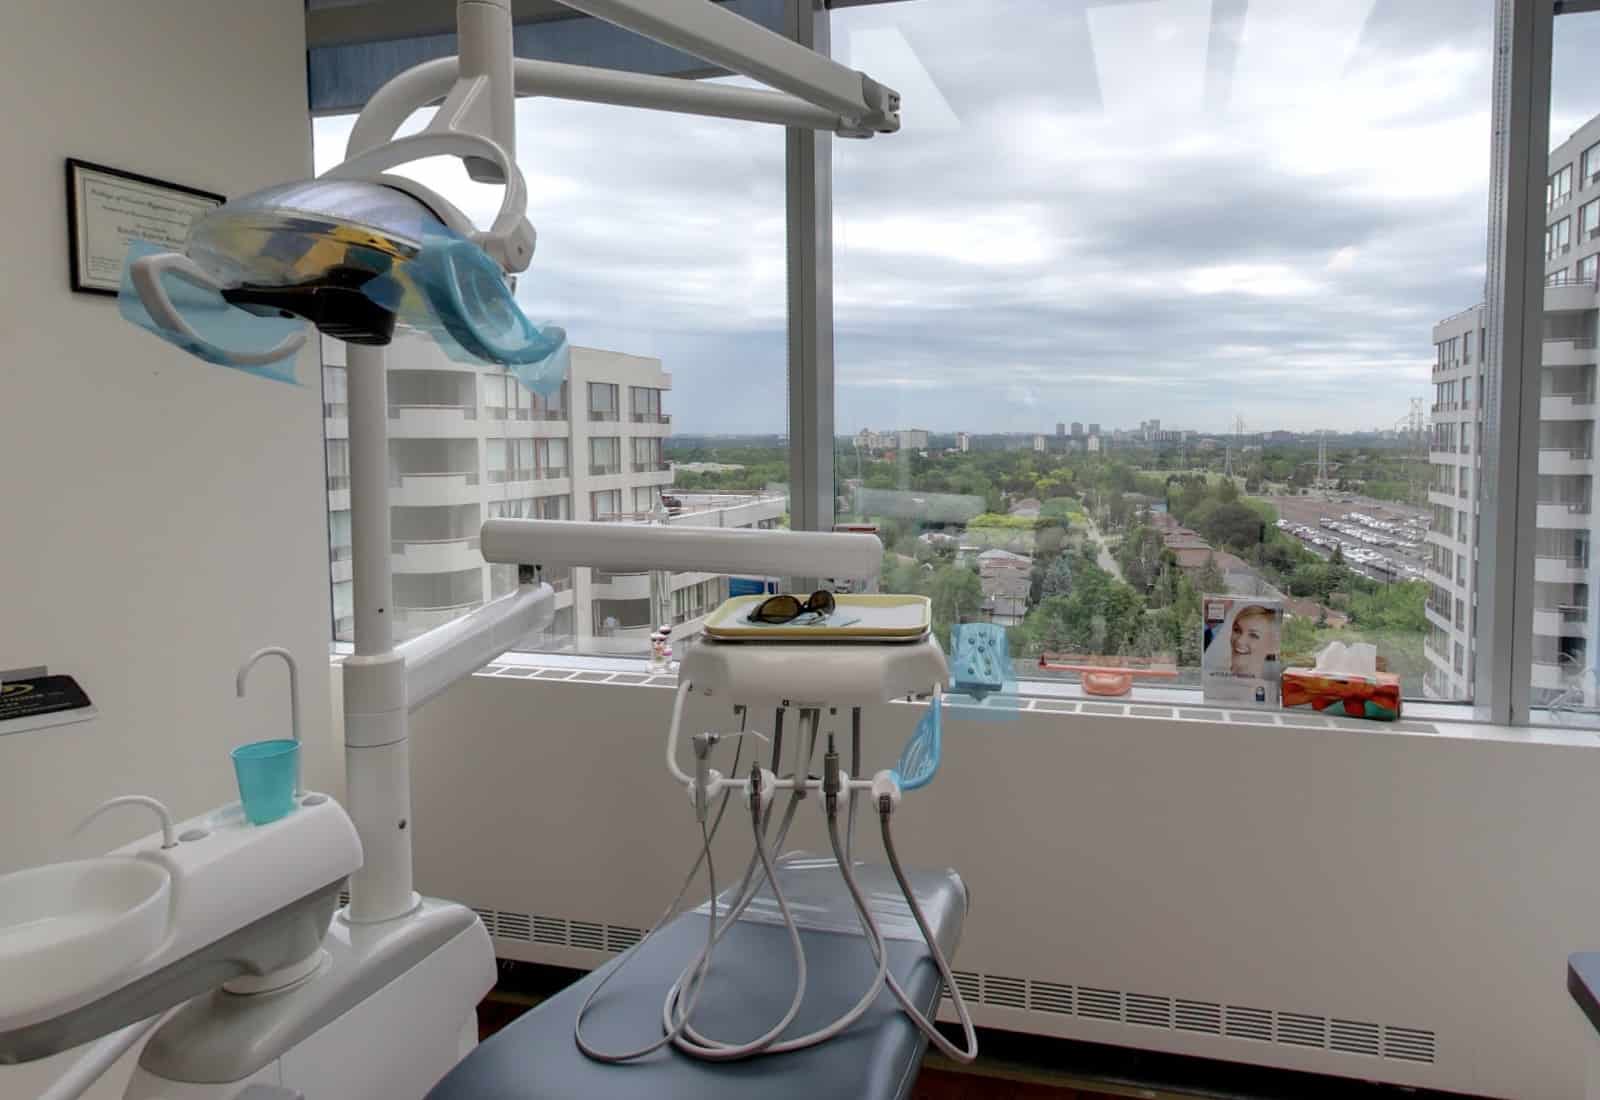 Dentist's chair inside clinic overlooking outdoor scenery.